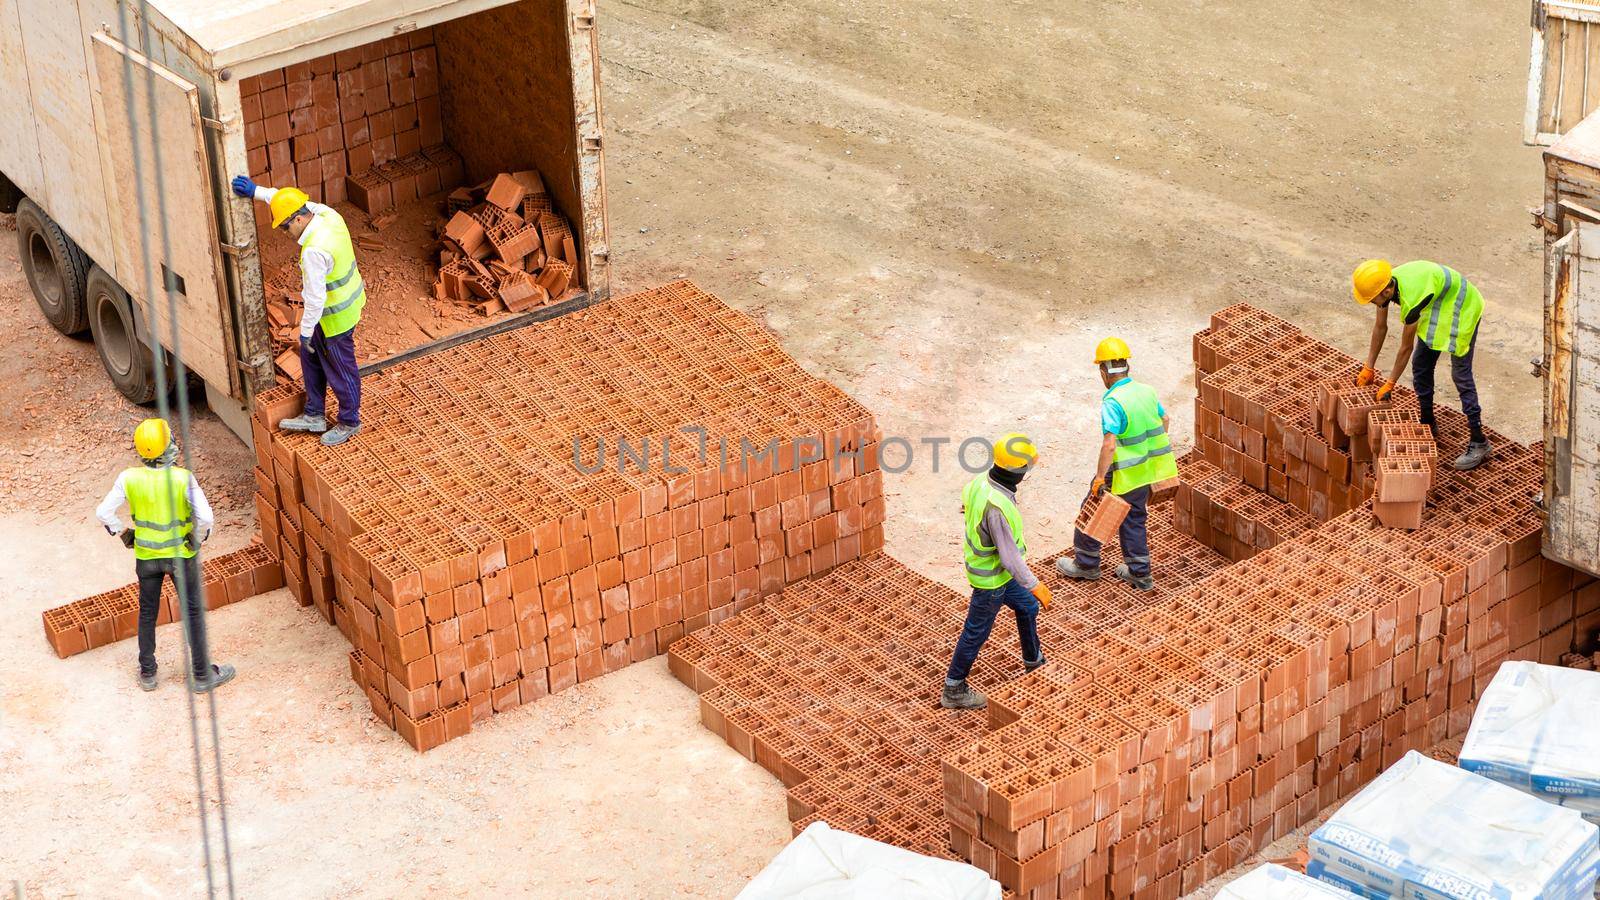 Construction workers unloading bricks, working on construction site